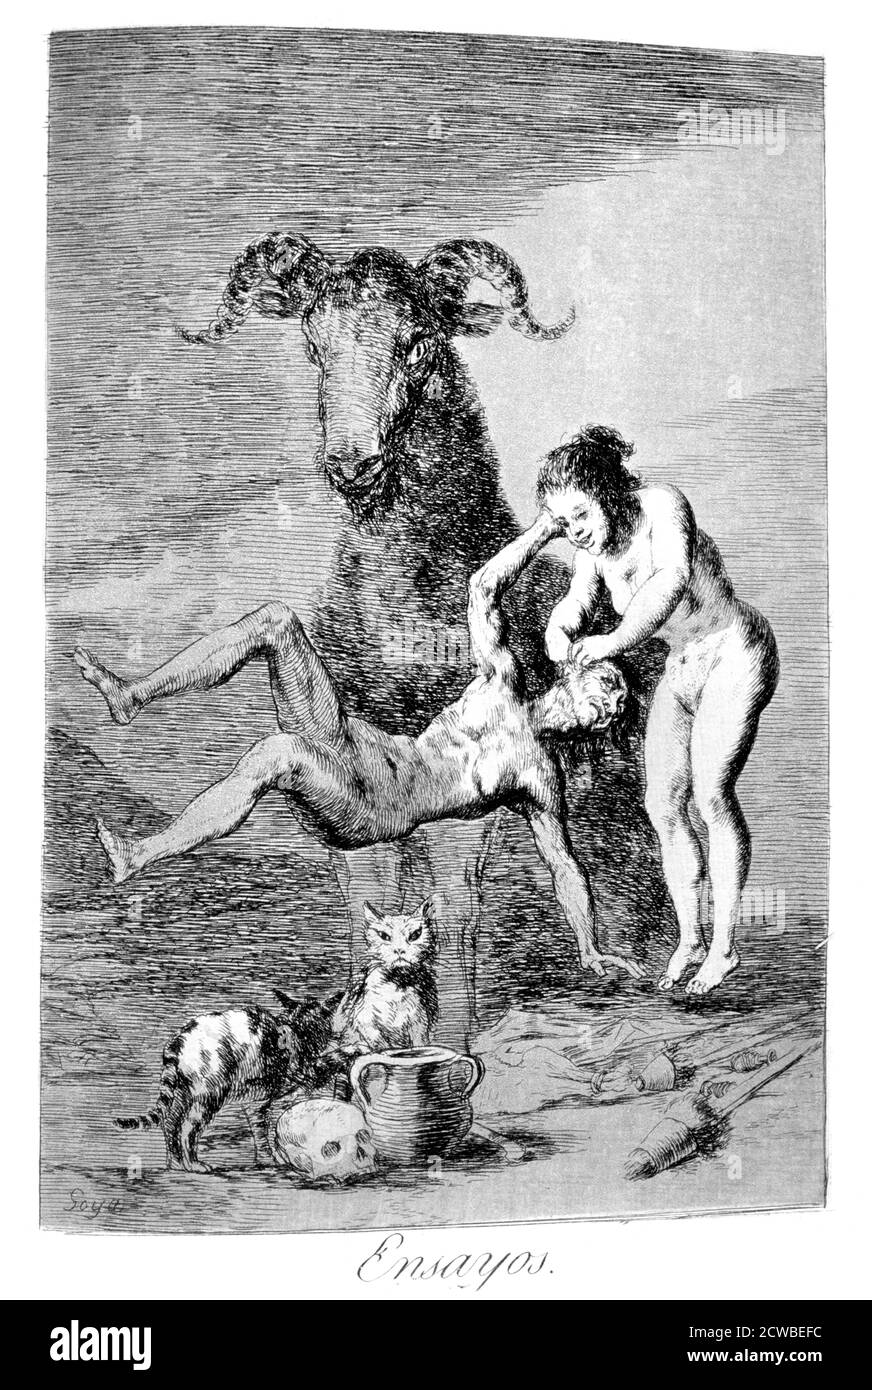 Trials', 1799 Artist: Francisco Goya. Plate 60 of 'Los Caprichos'. Los Caprichos are a set of 80 prints in aquatint and etching created by the Spanish artist Francisco Goya in 1797 and 1798, and published as an album in 1799. Stock Photo